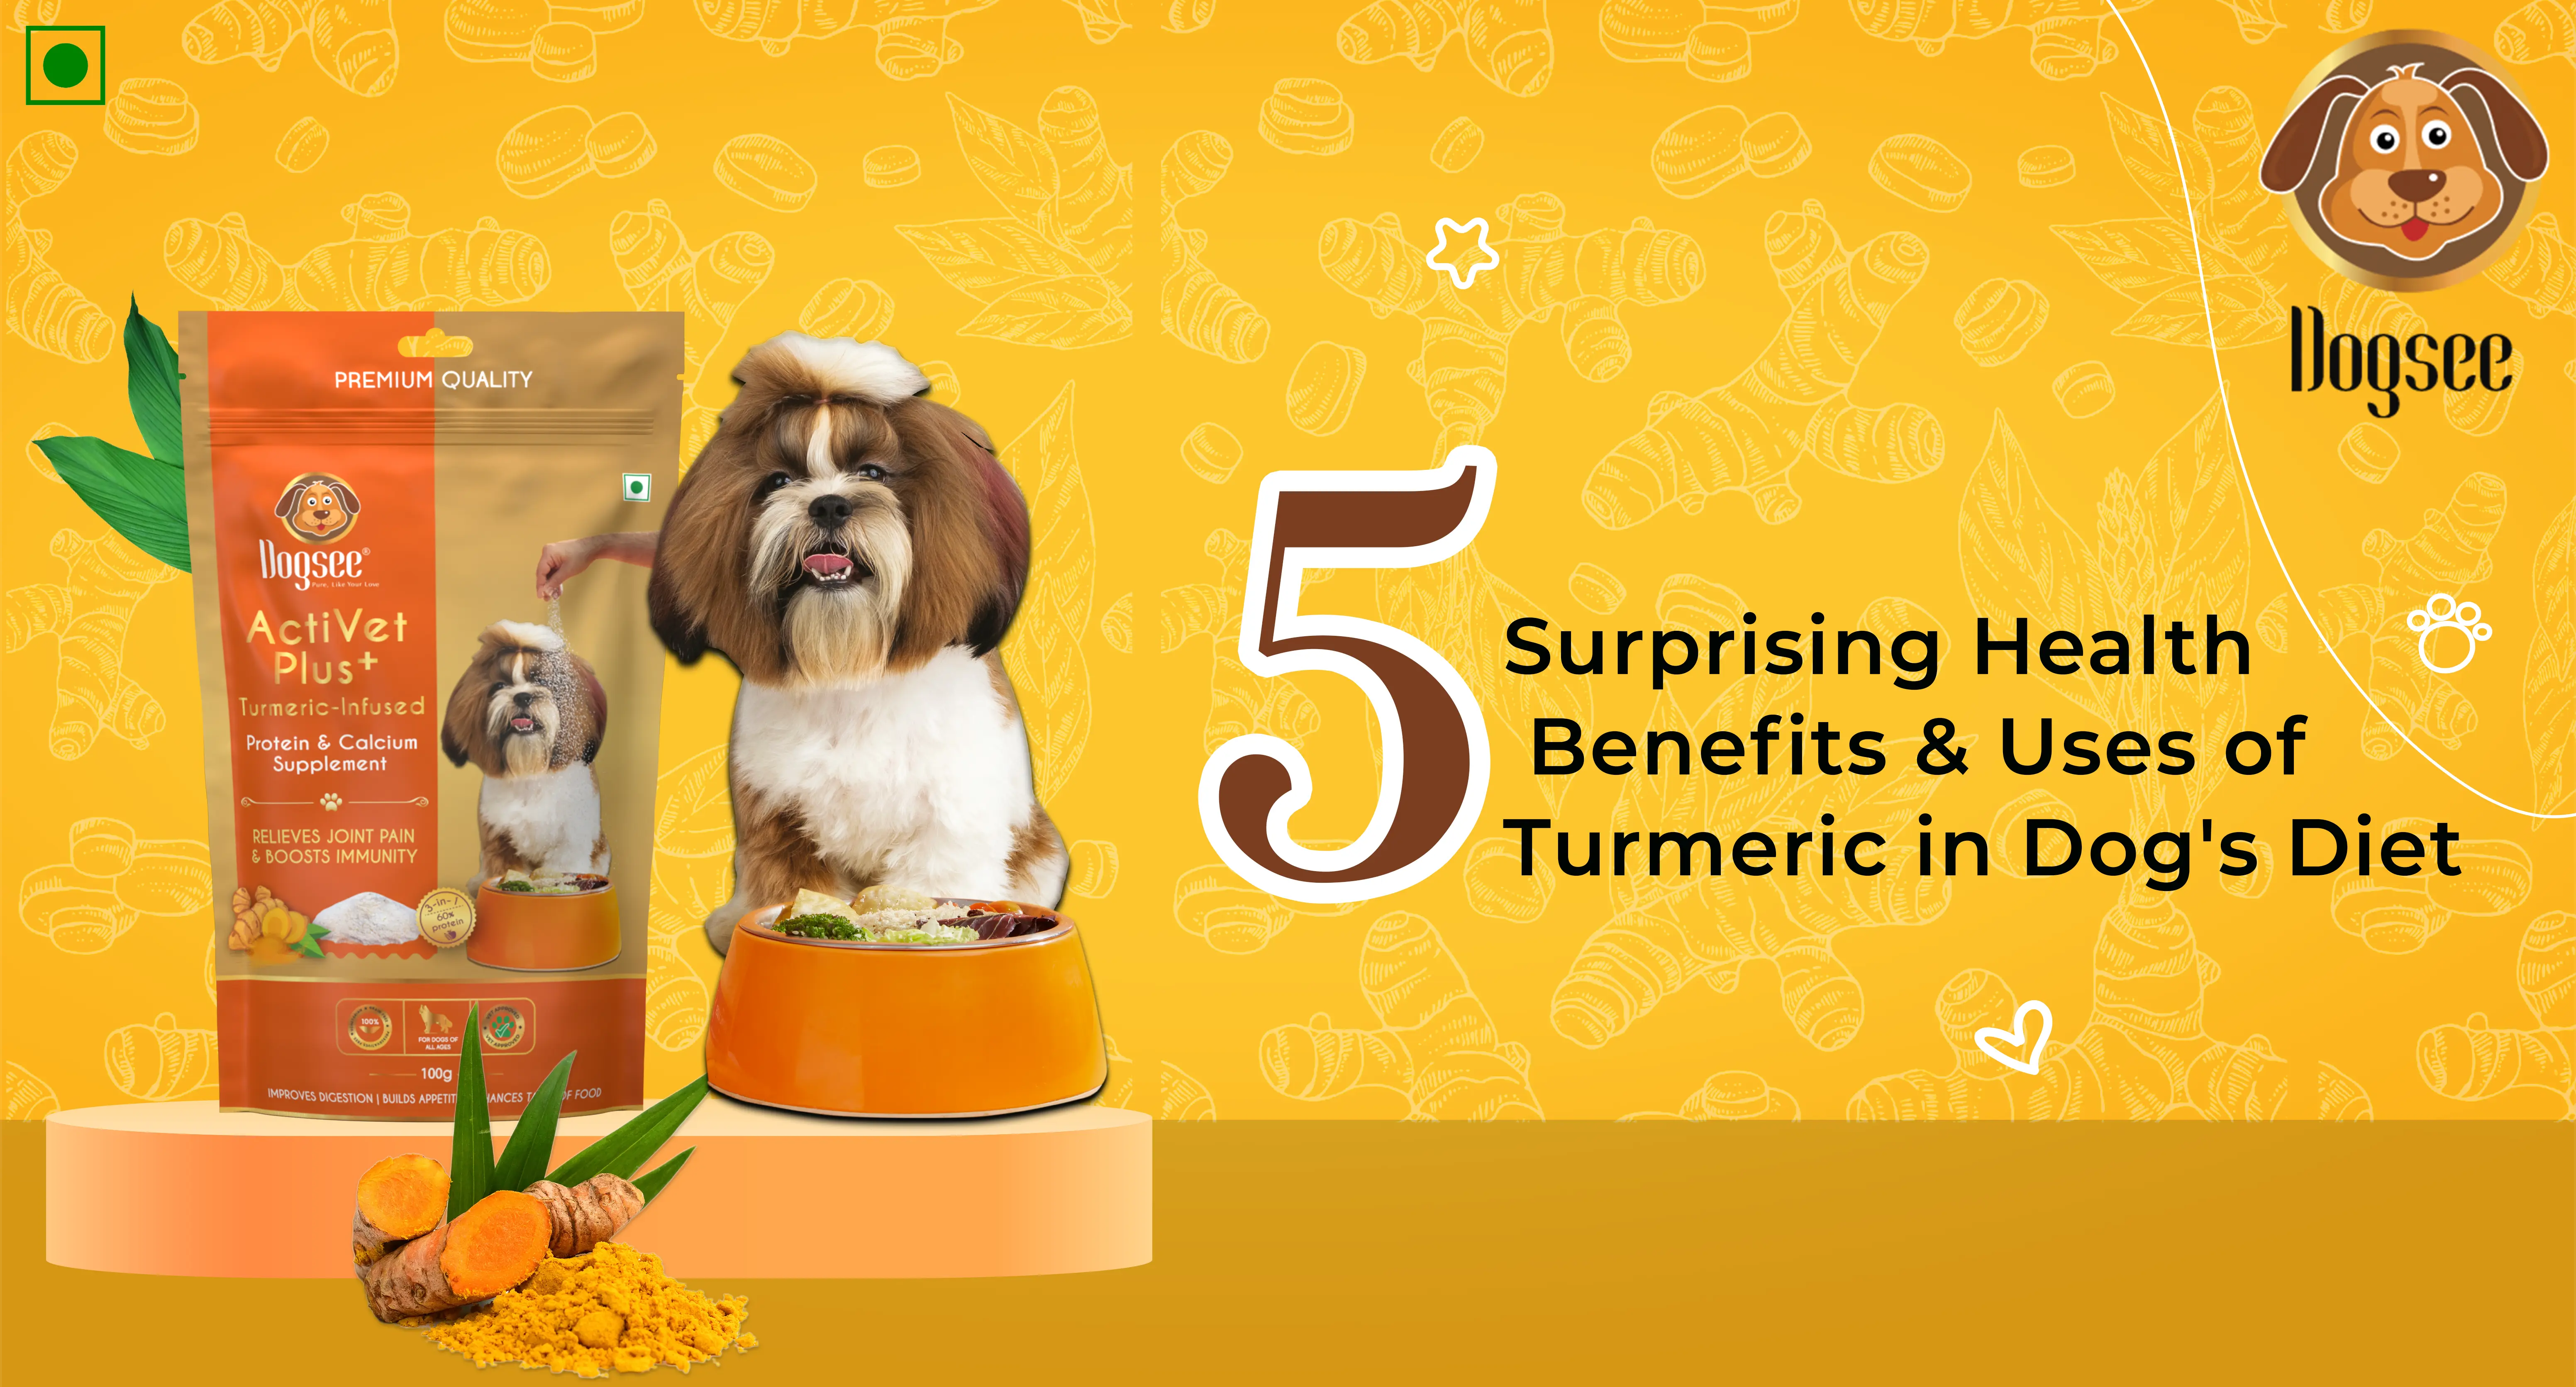 5 Surprising Health Benefits & Uses of Turmeric in Dog's Diet